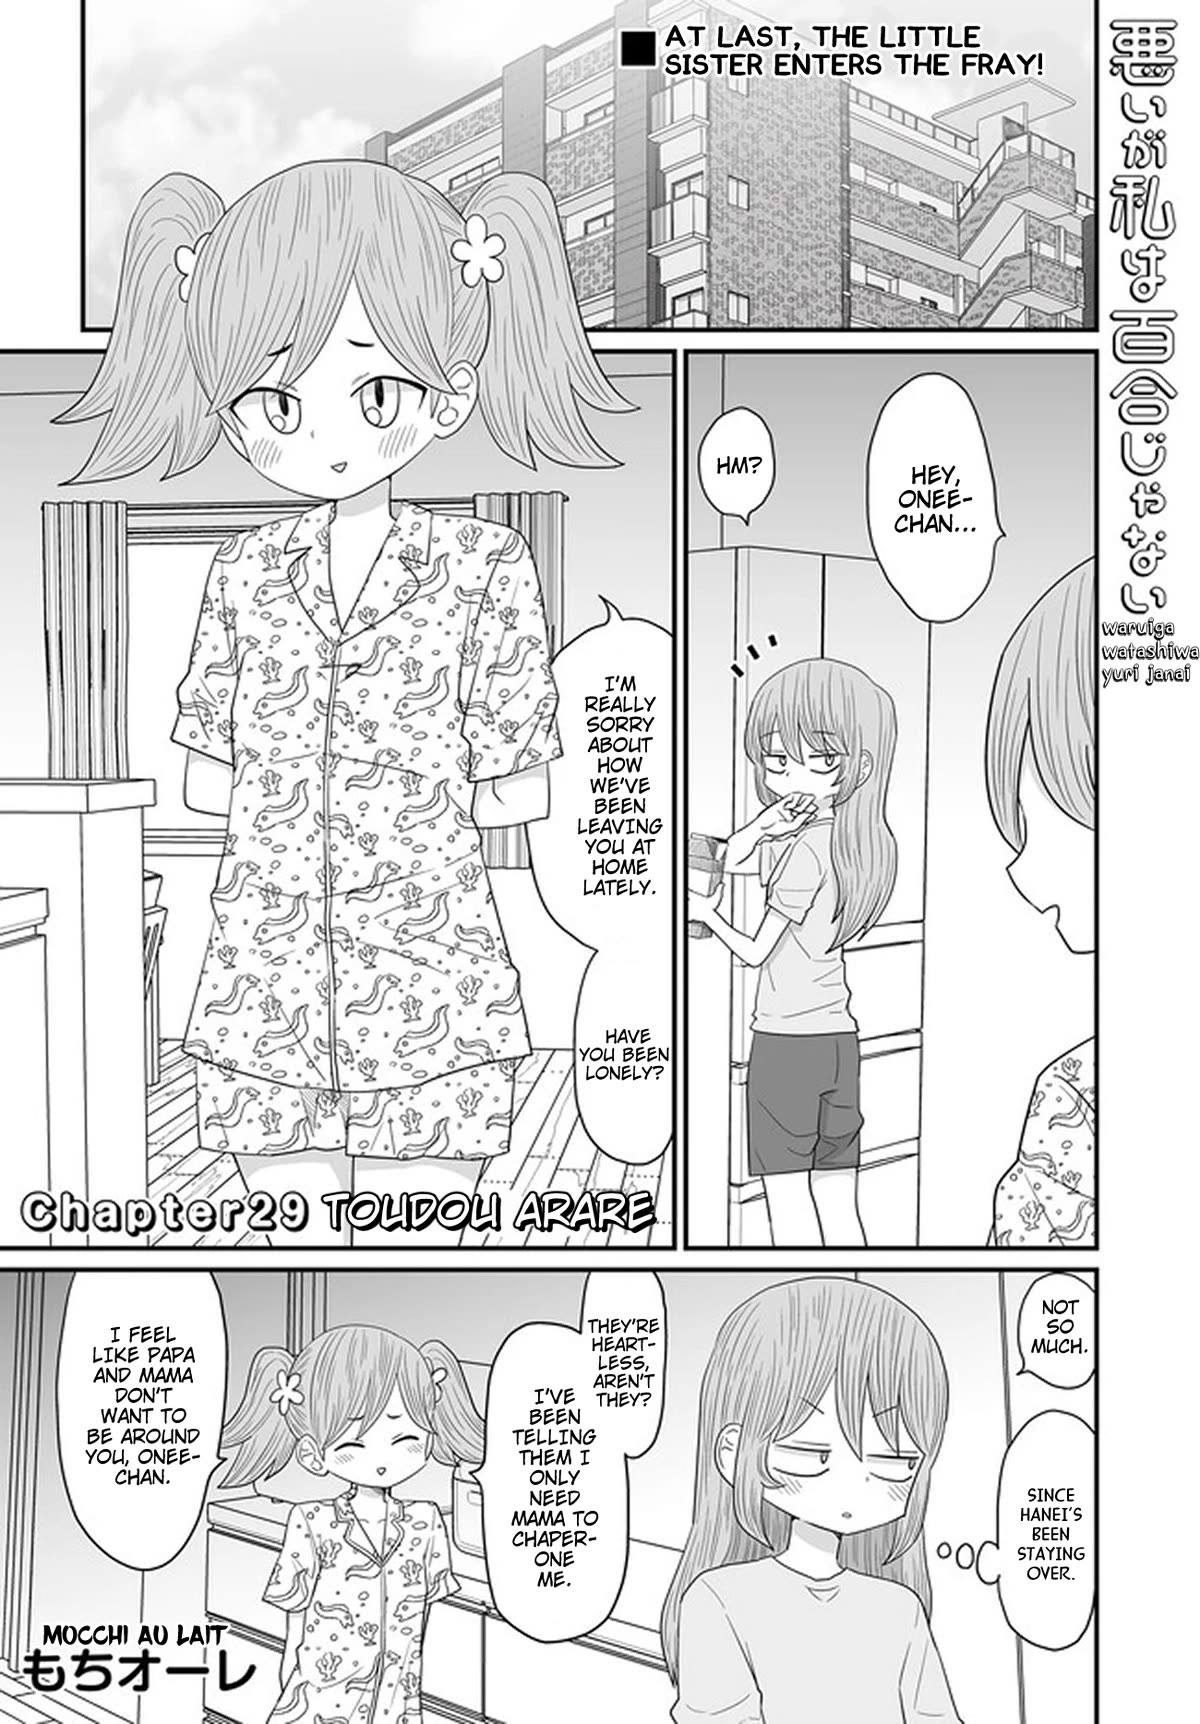 Sorry But I'm Not Yuri - chapter 29 - #1